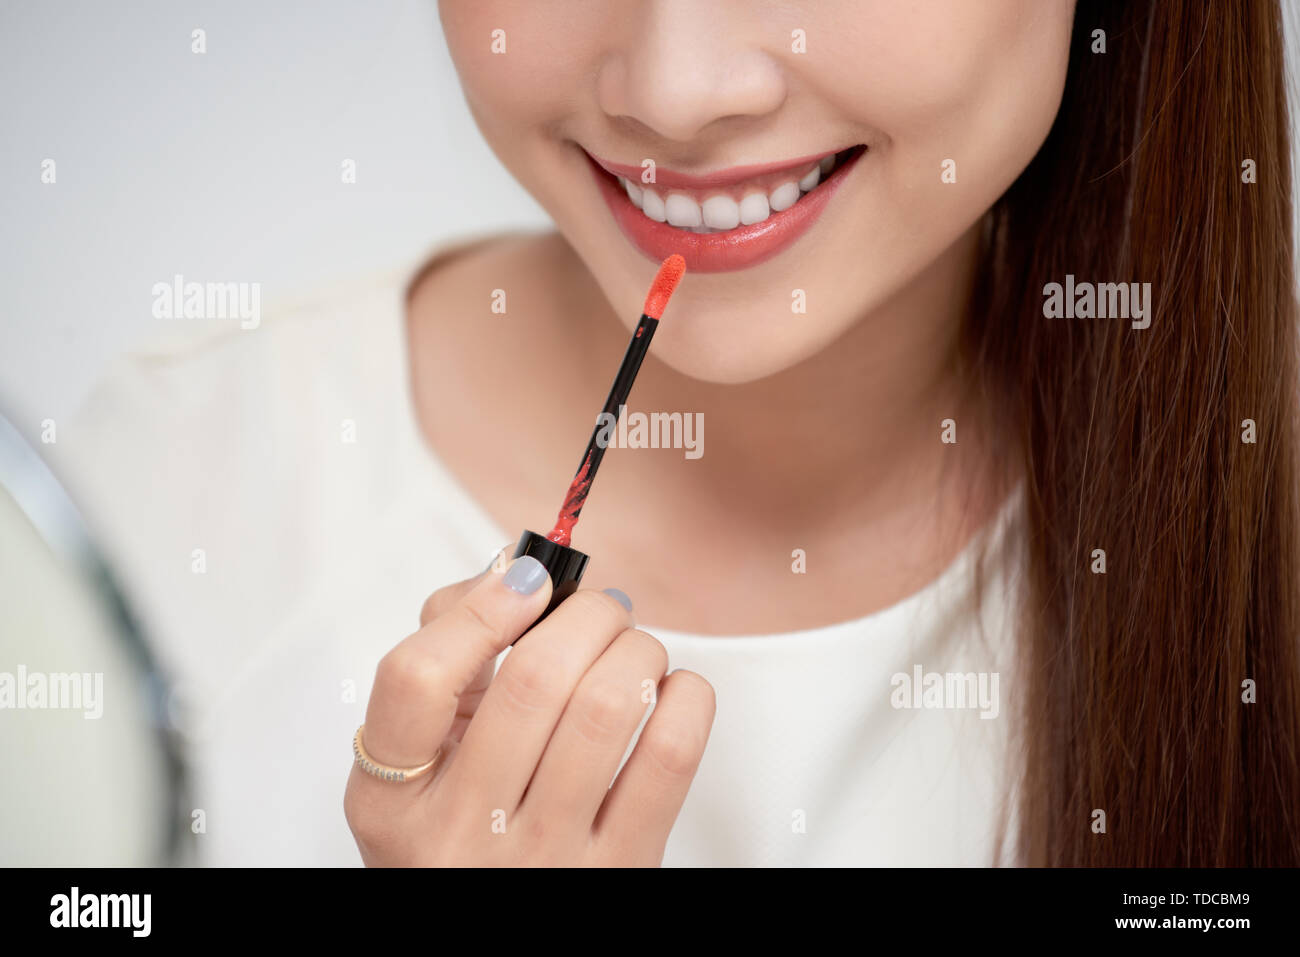 Young beautiful woman professional beauty vlogger or blogger applying lipstick cream to her mouth, doing a make up tutorial Stock Photo